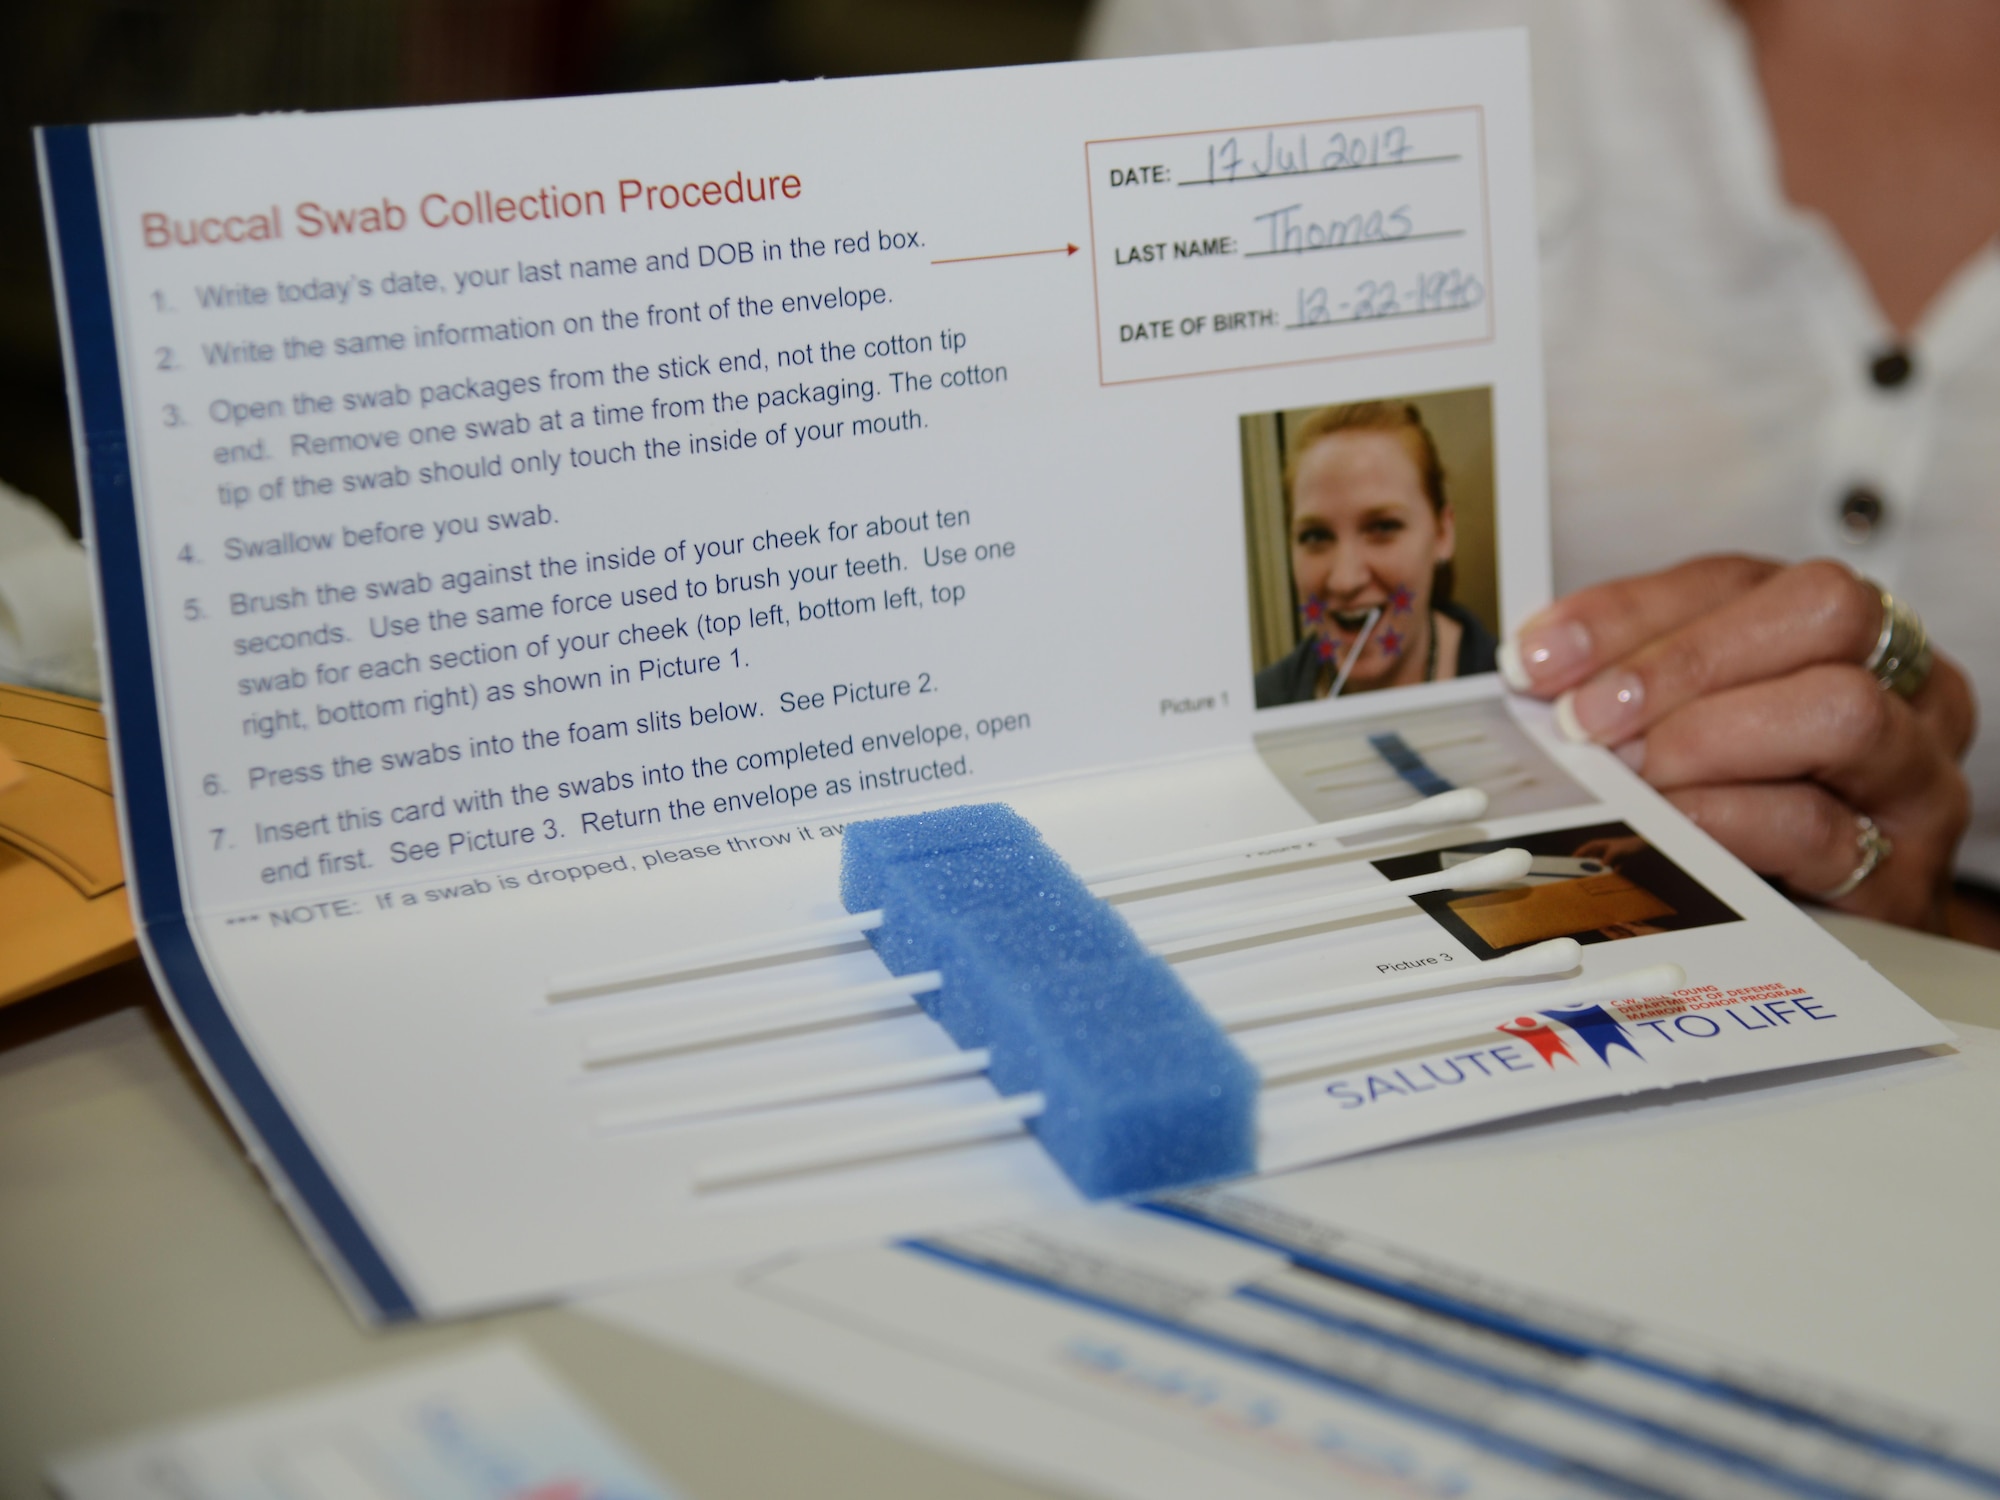 Ms. Dorothy Thomas, 47th Force Support Squadron chief of unit training, displays the swabs used for her registration during the “Salute to Bone Marrow Donor Registration Fair” at Laughlin Air Force Base, Tx., July 17, 2017. To register, participants are required to fill out a consent form and complete four cheek swabs. (U.S. Air Force photo/Airman 1st Class Benjamin N. Valmoja)